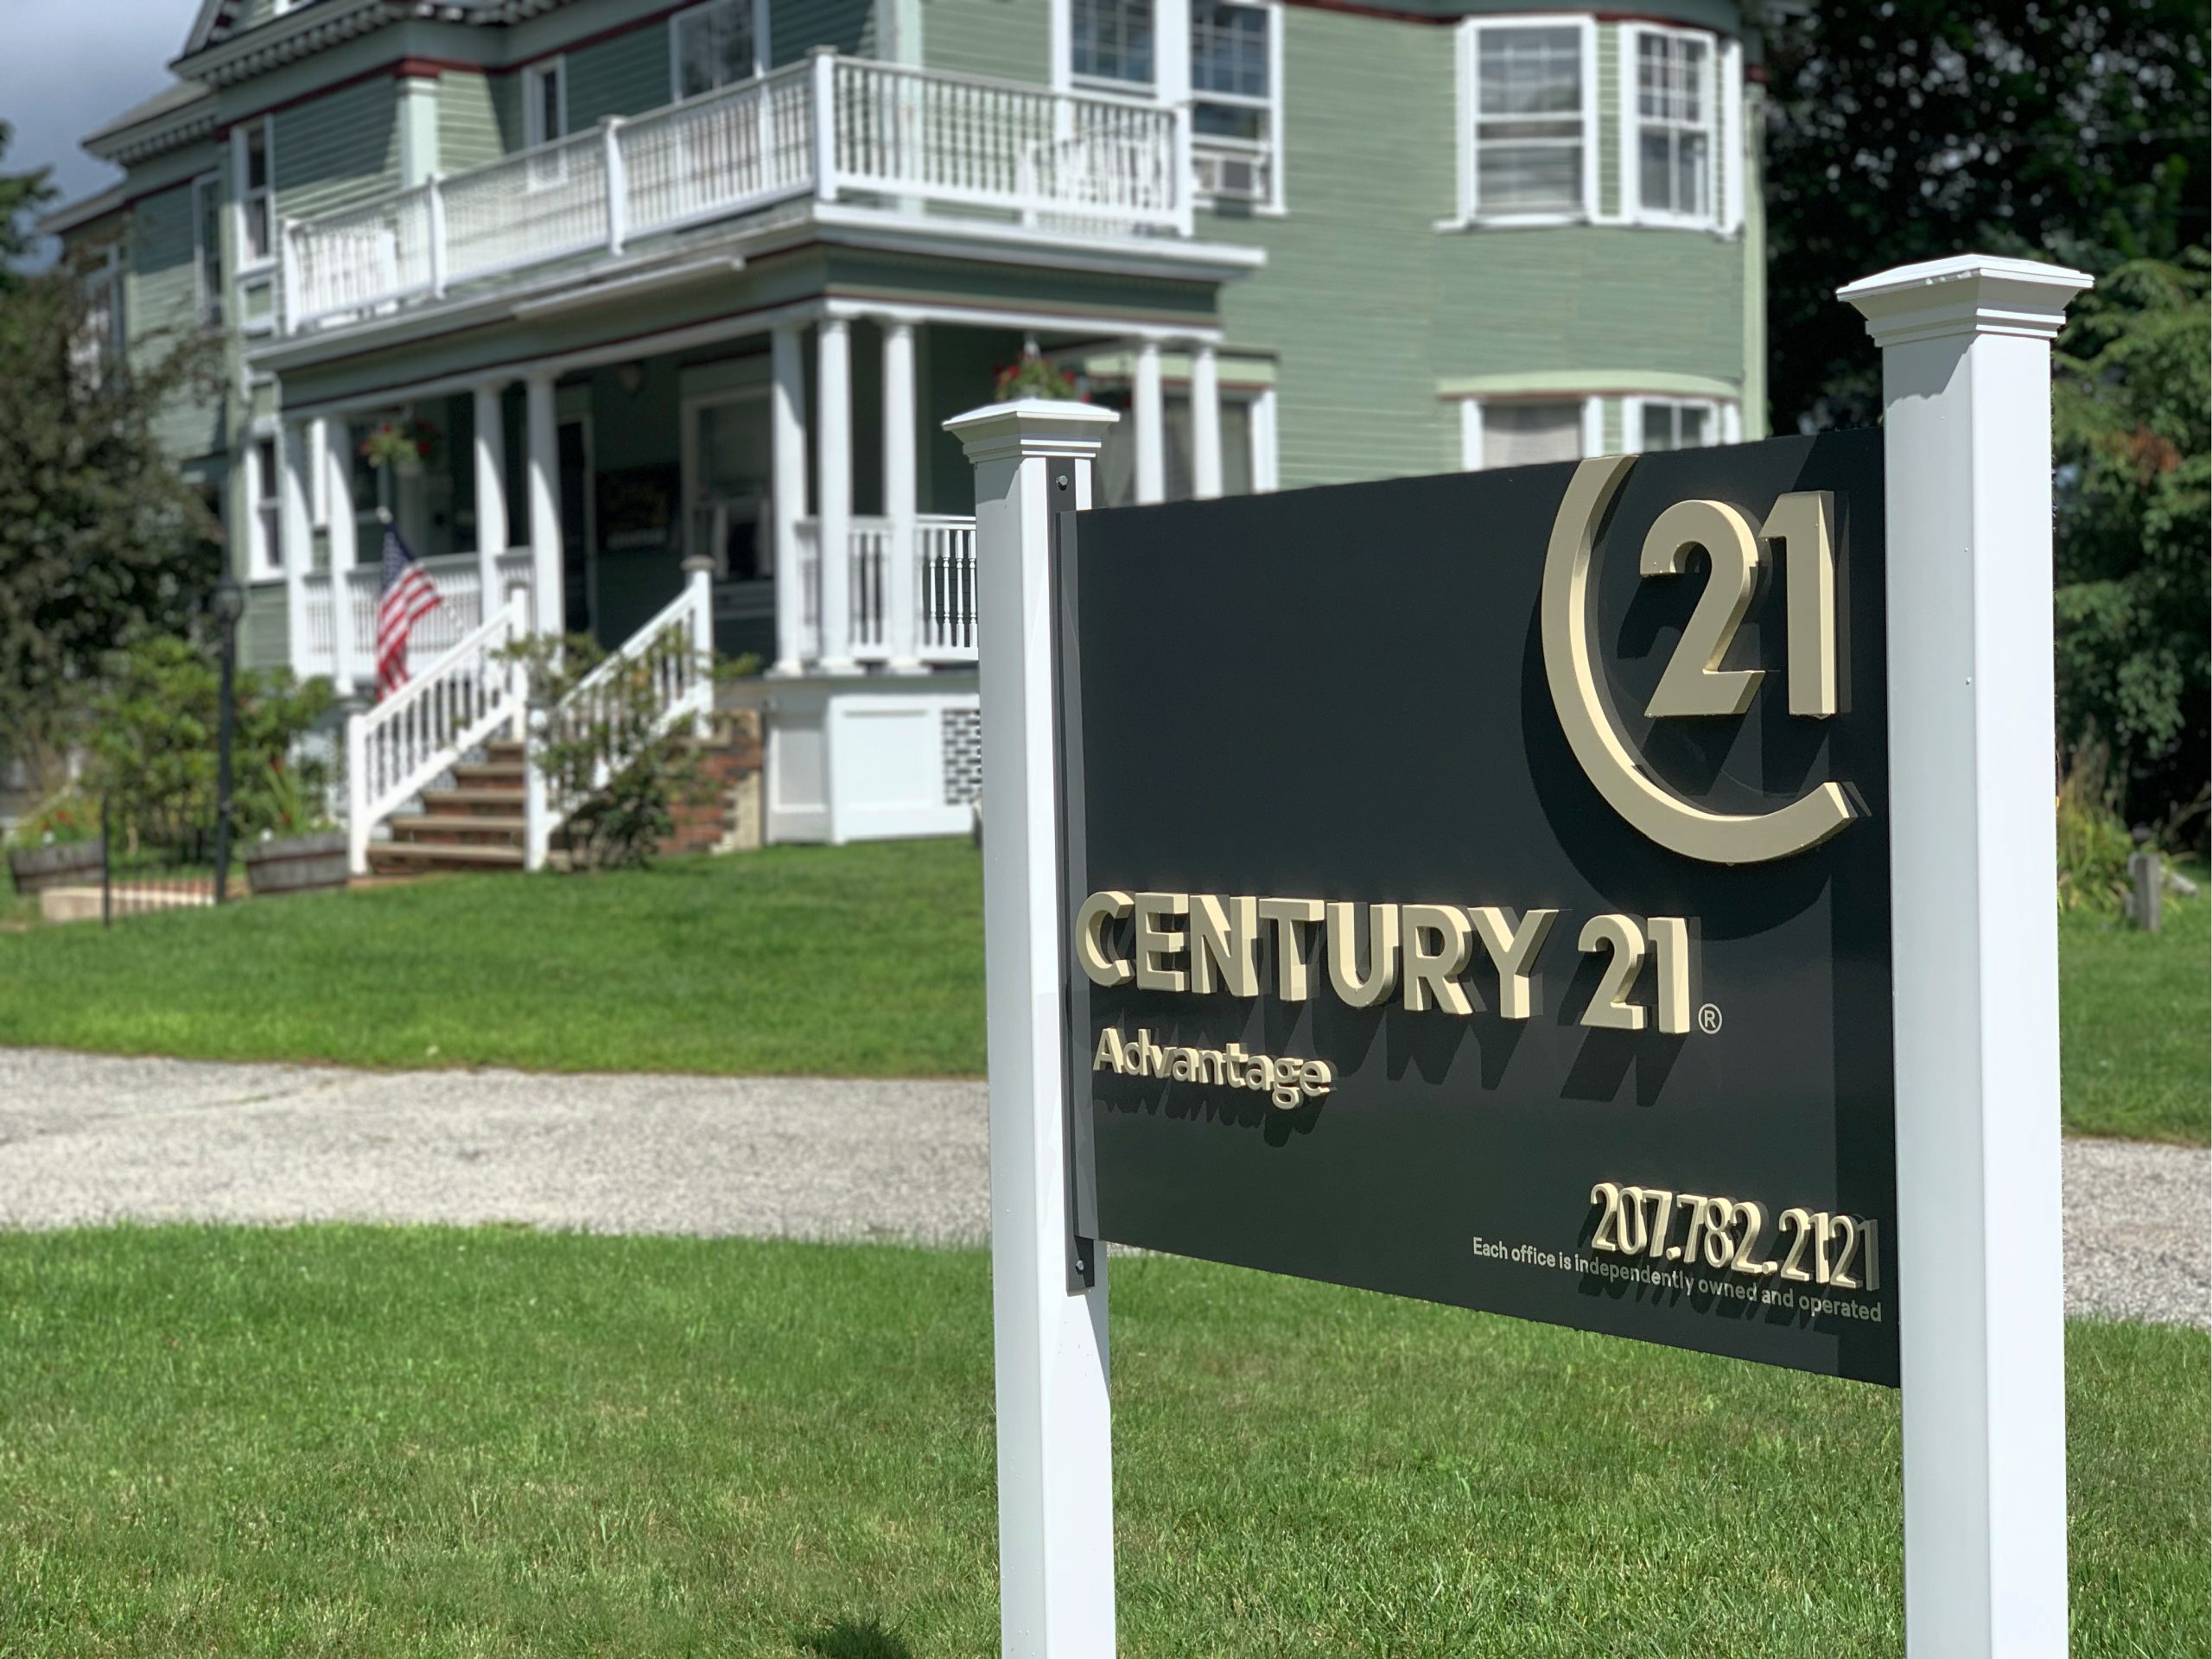 CENTURY 21 Lewiston, ME Exterior office sign in front of the historical office building